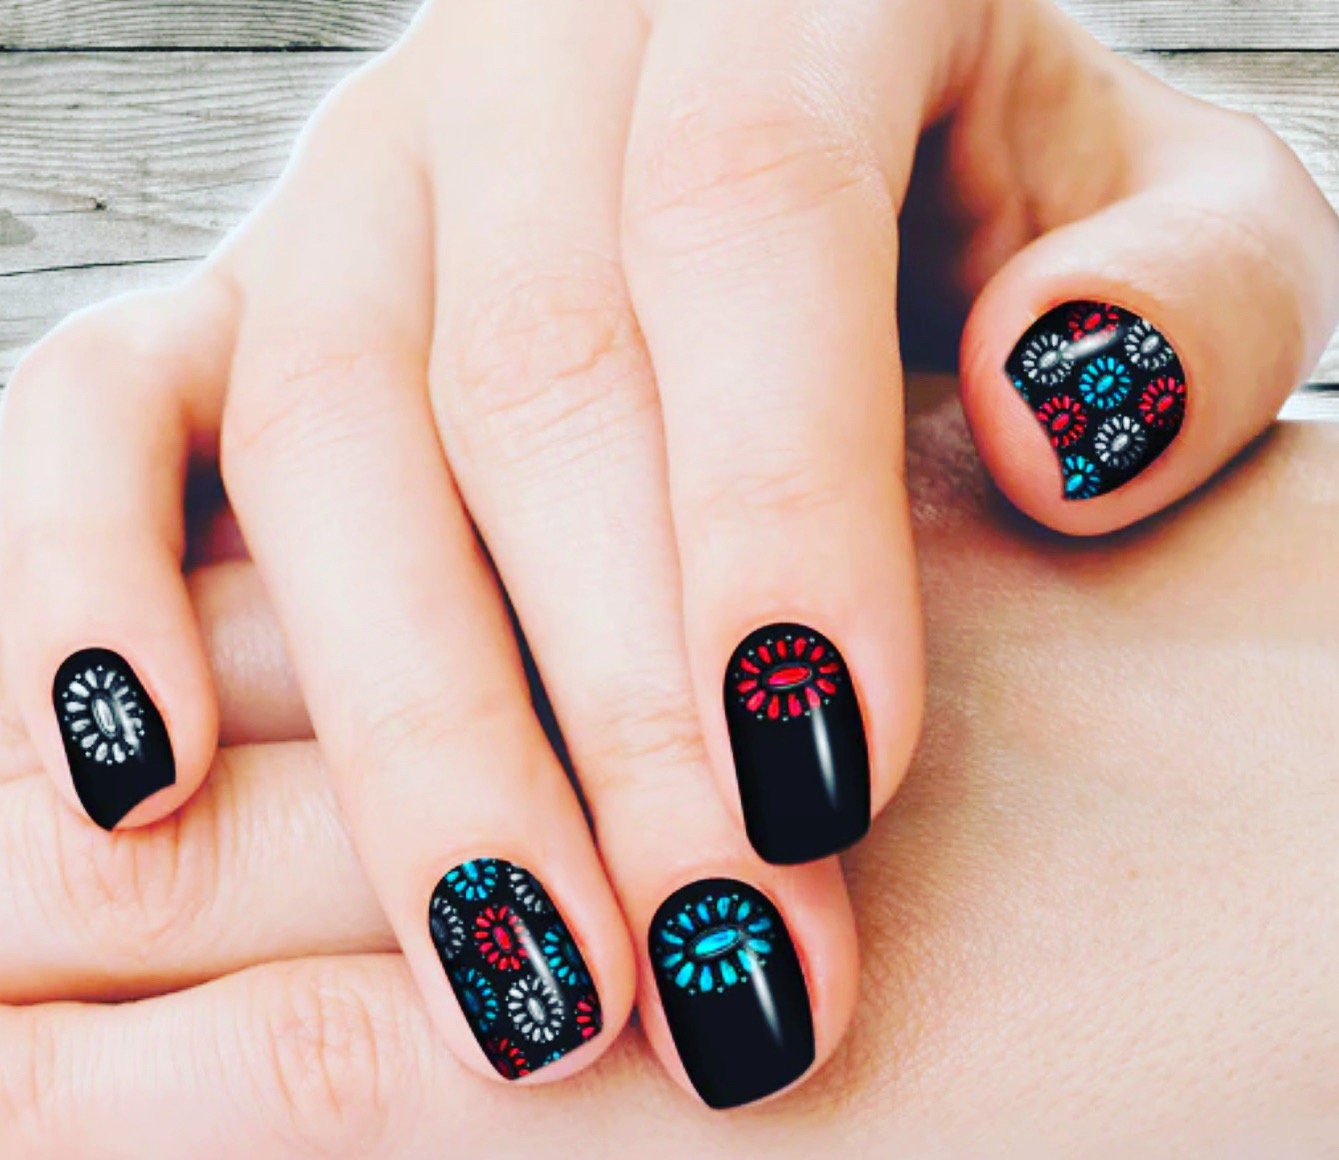 Teal And Black Coffin Nails by PampurredNails